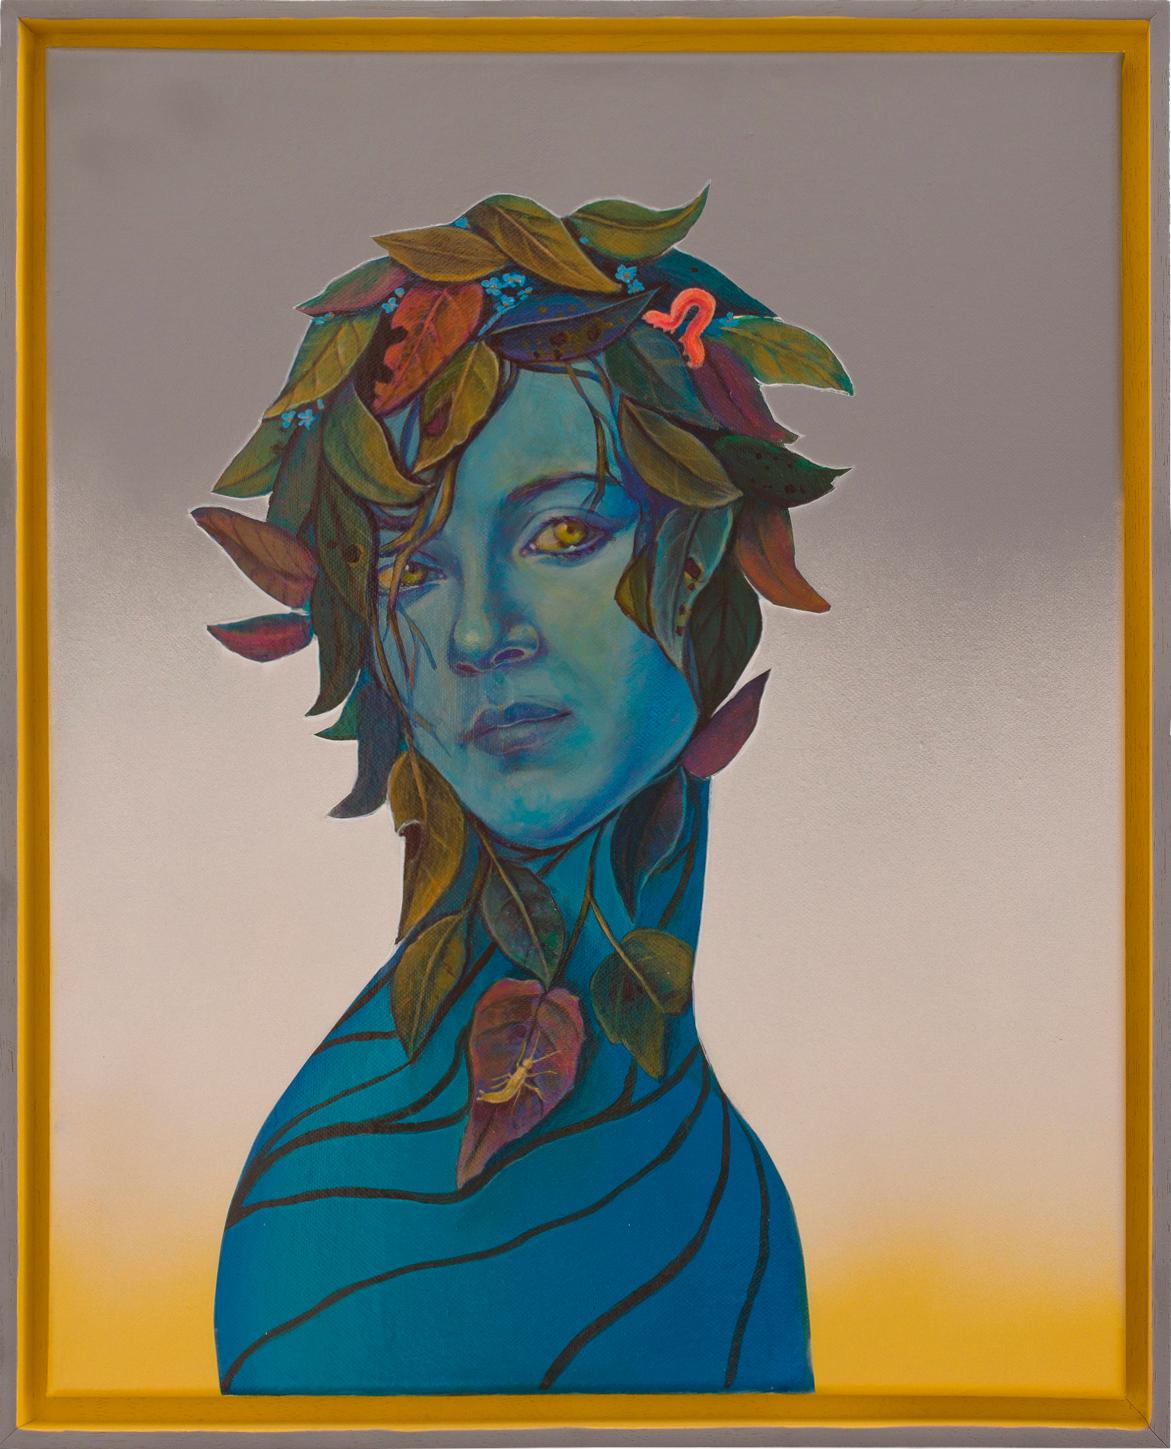 Natasha Lelenco Portrait Painting - Blue Madonna With Flowers And Insects. Pop Surrealism Painting. Framed. 